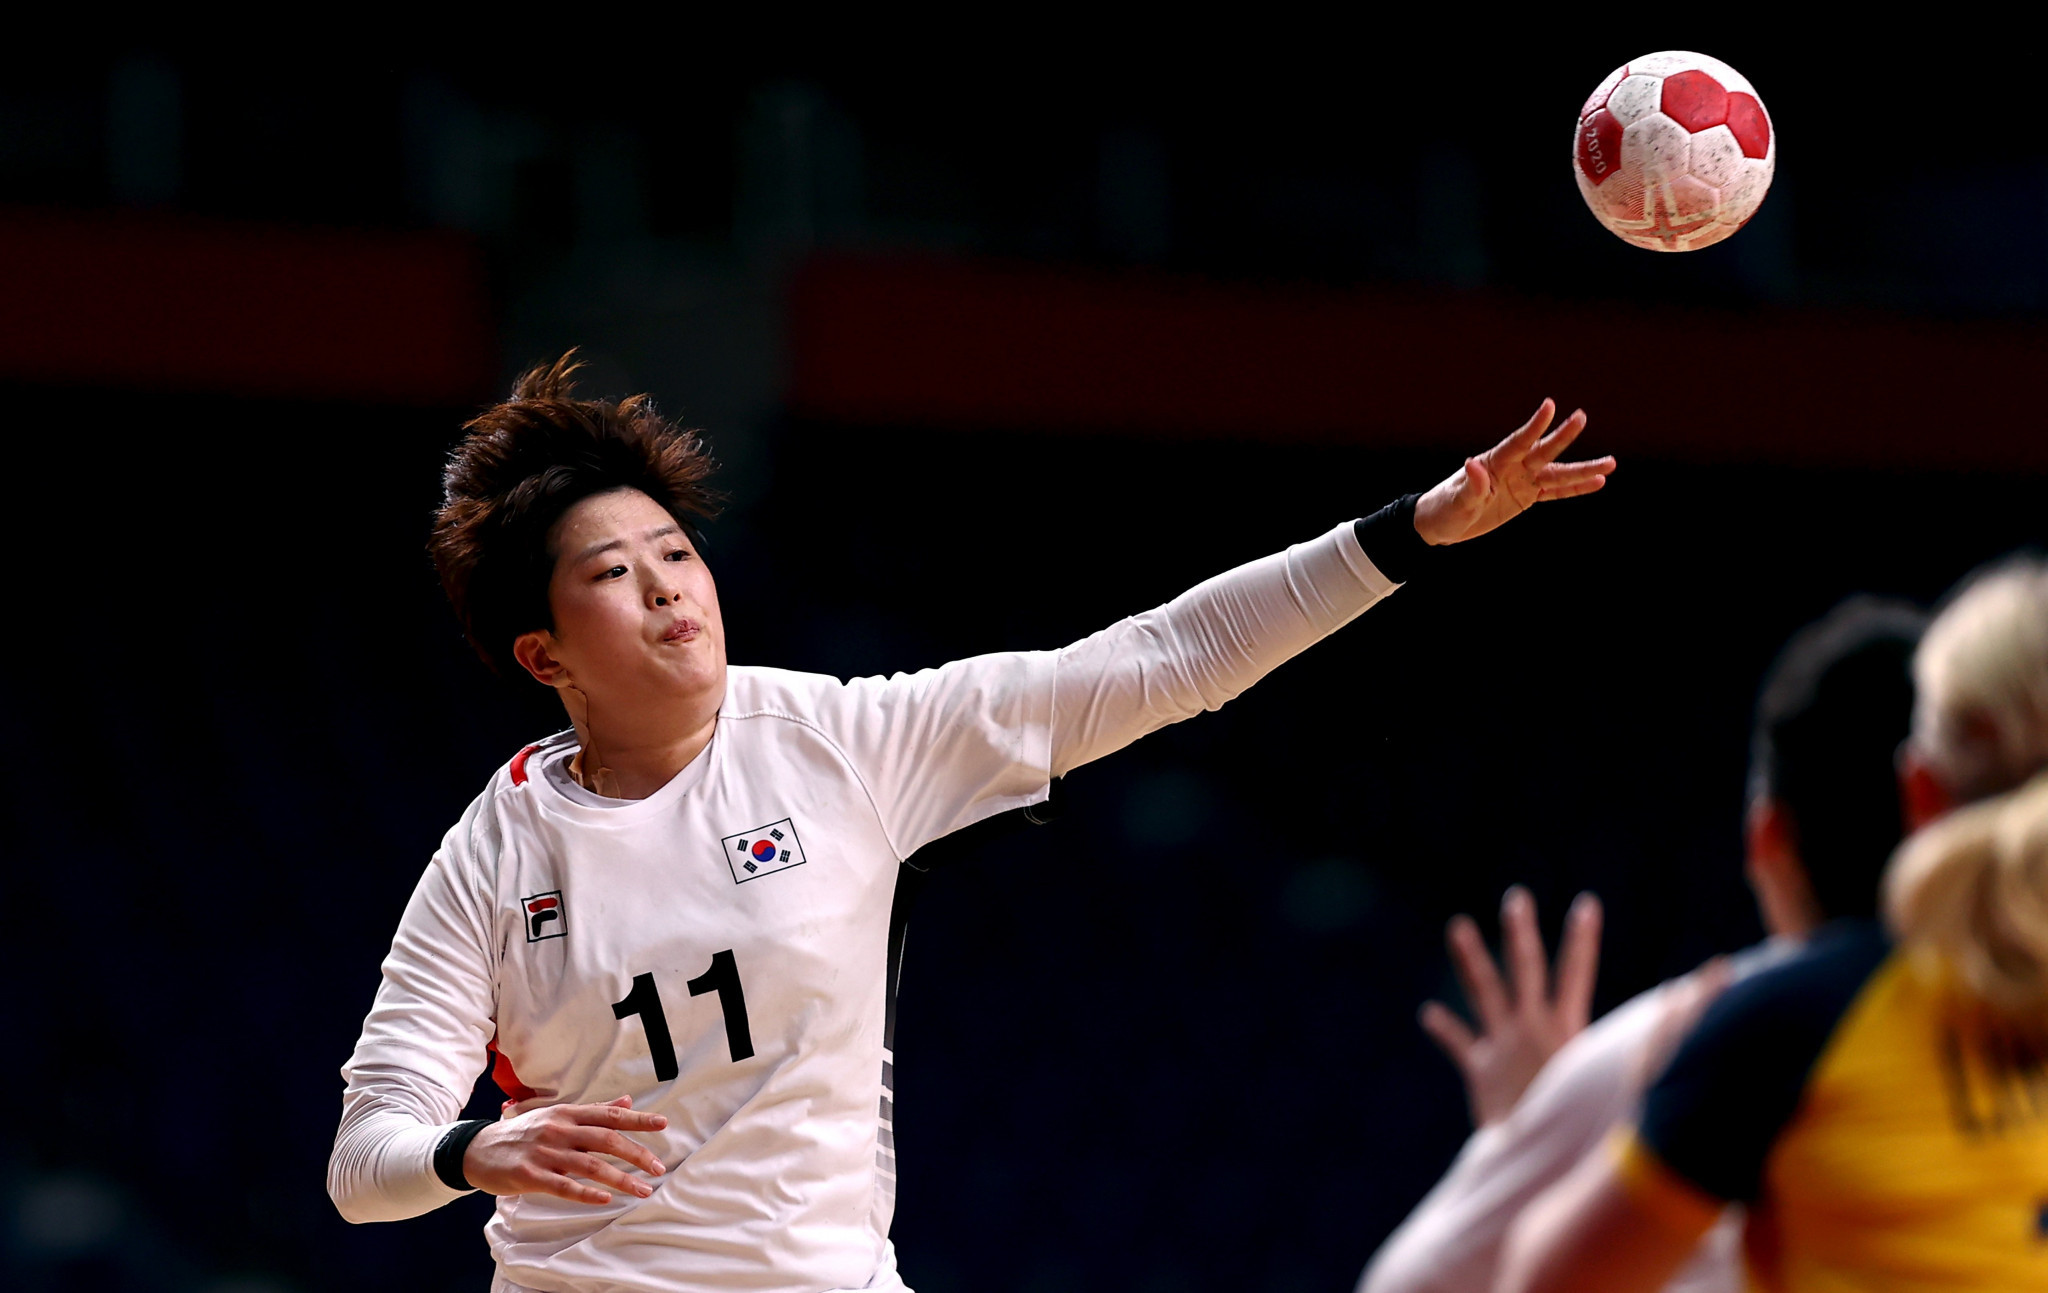 Ryu Eun-hee scored thrice in a South Korean win ©Getty Images